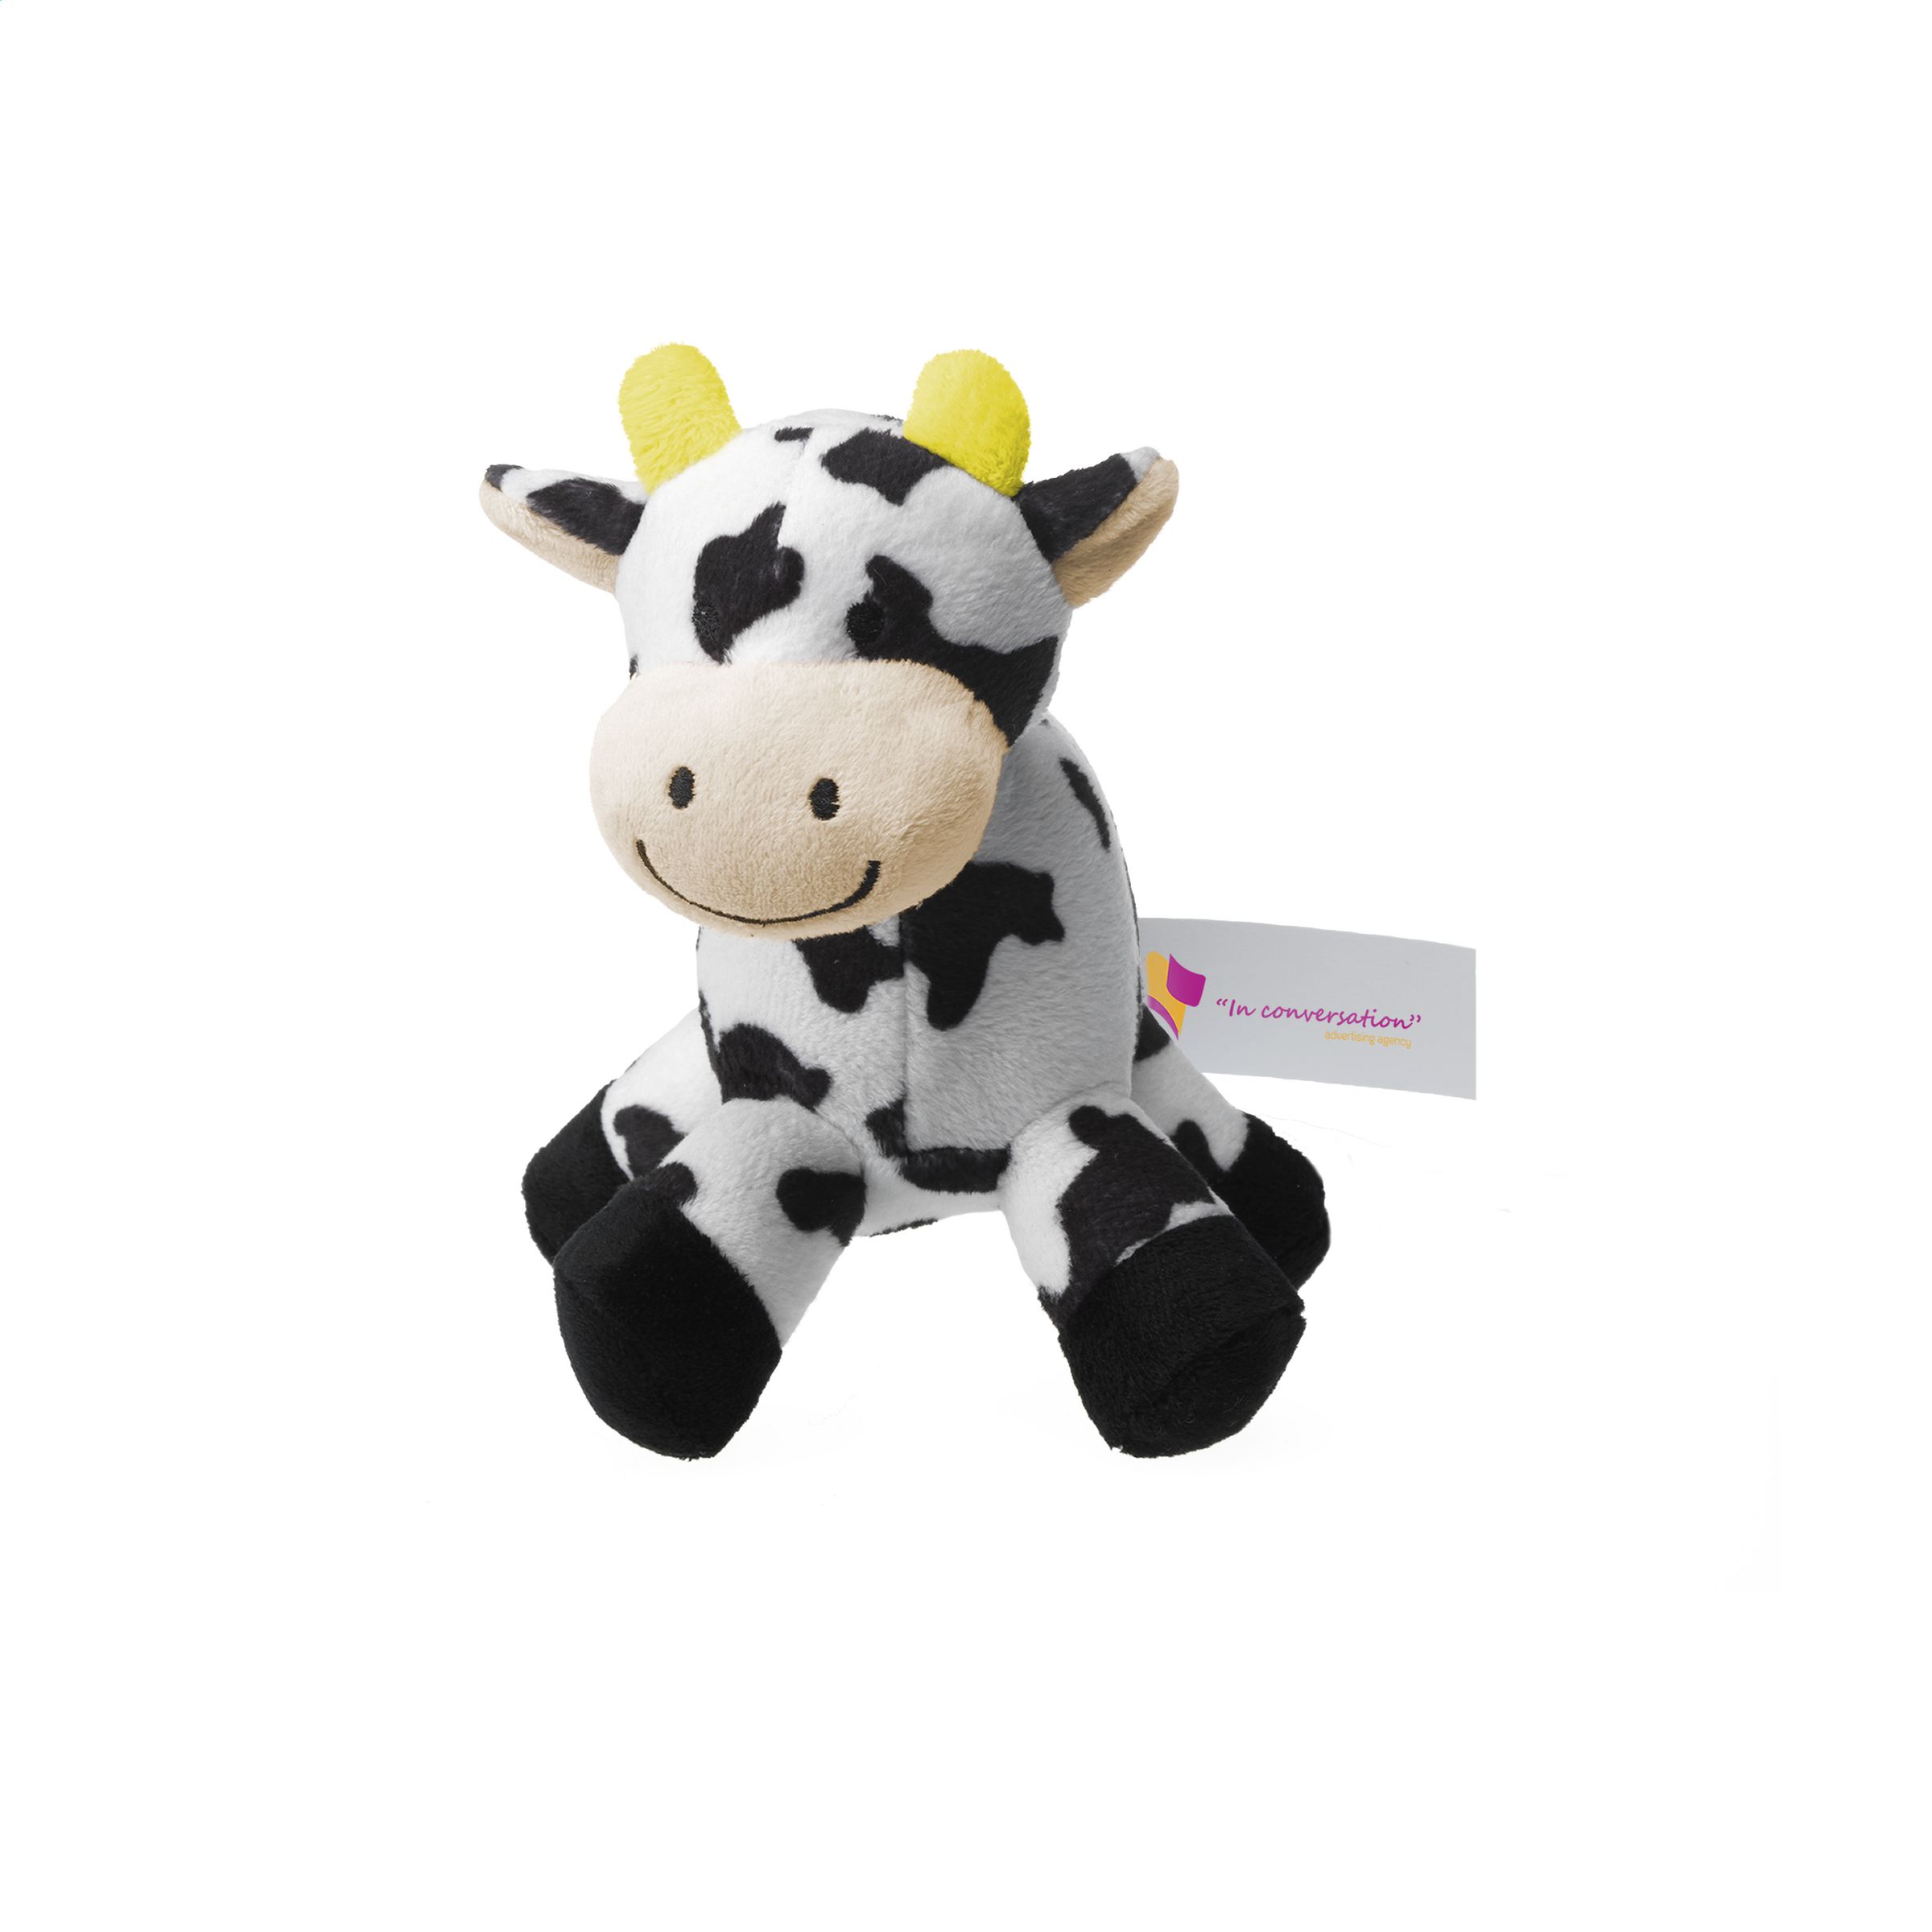 A super soft, plush, joyous cow from Much Wenlock - Great Harwood